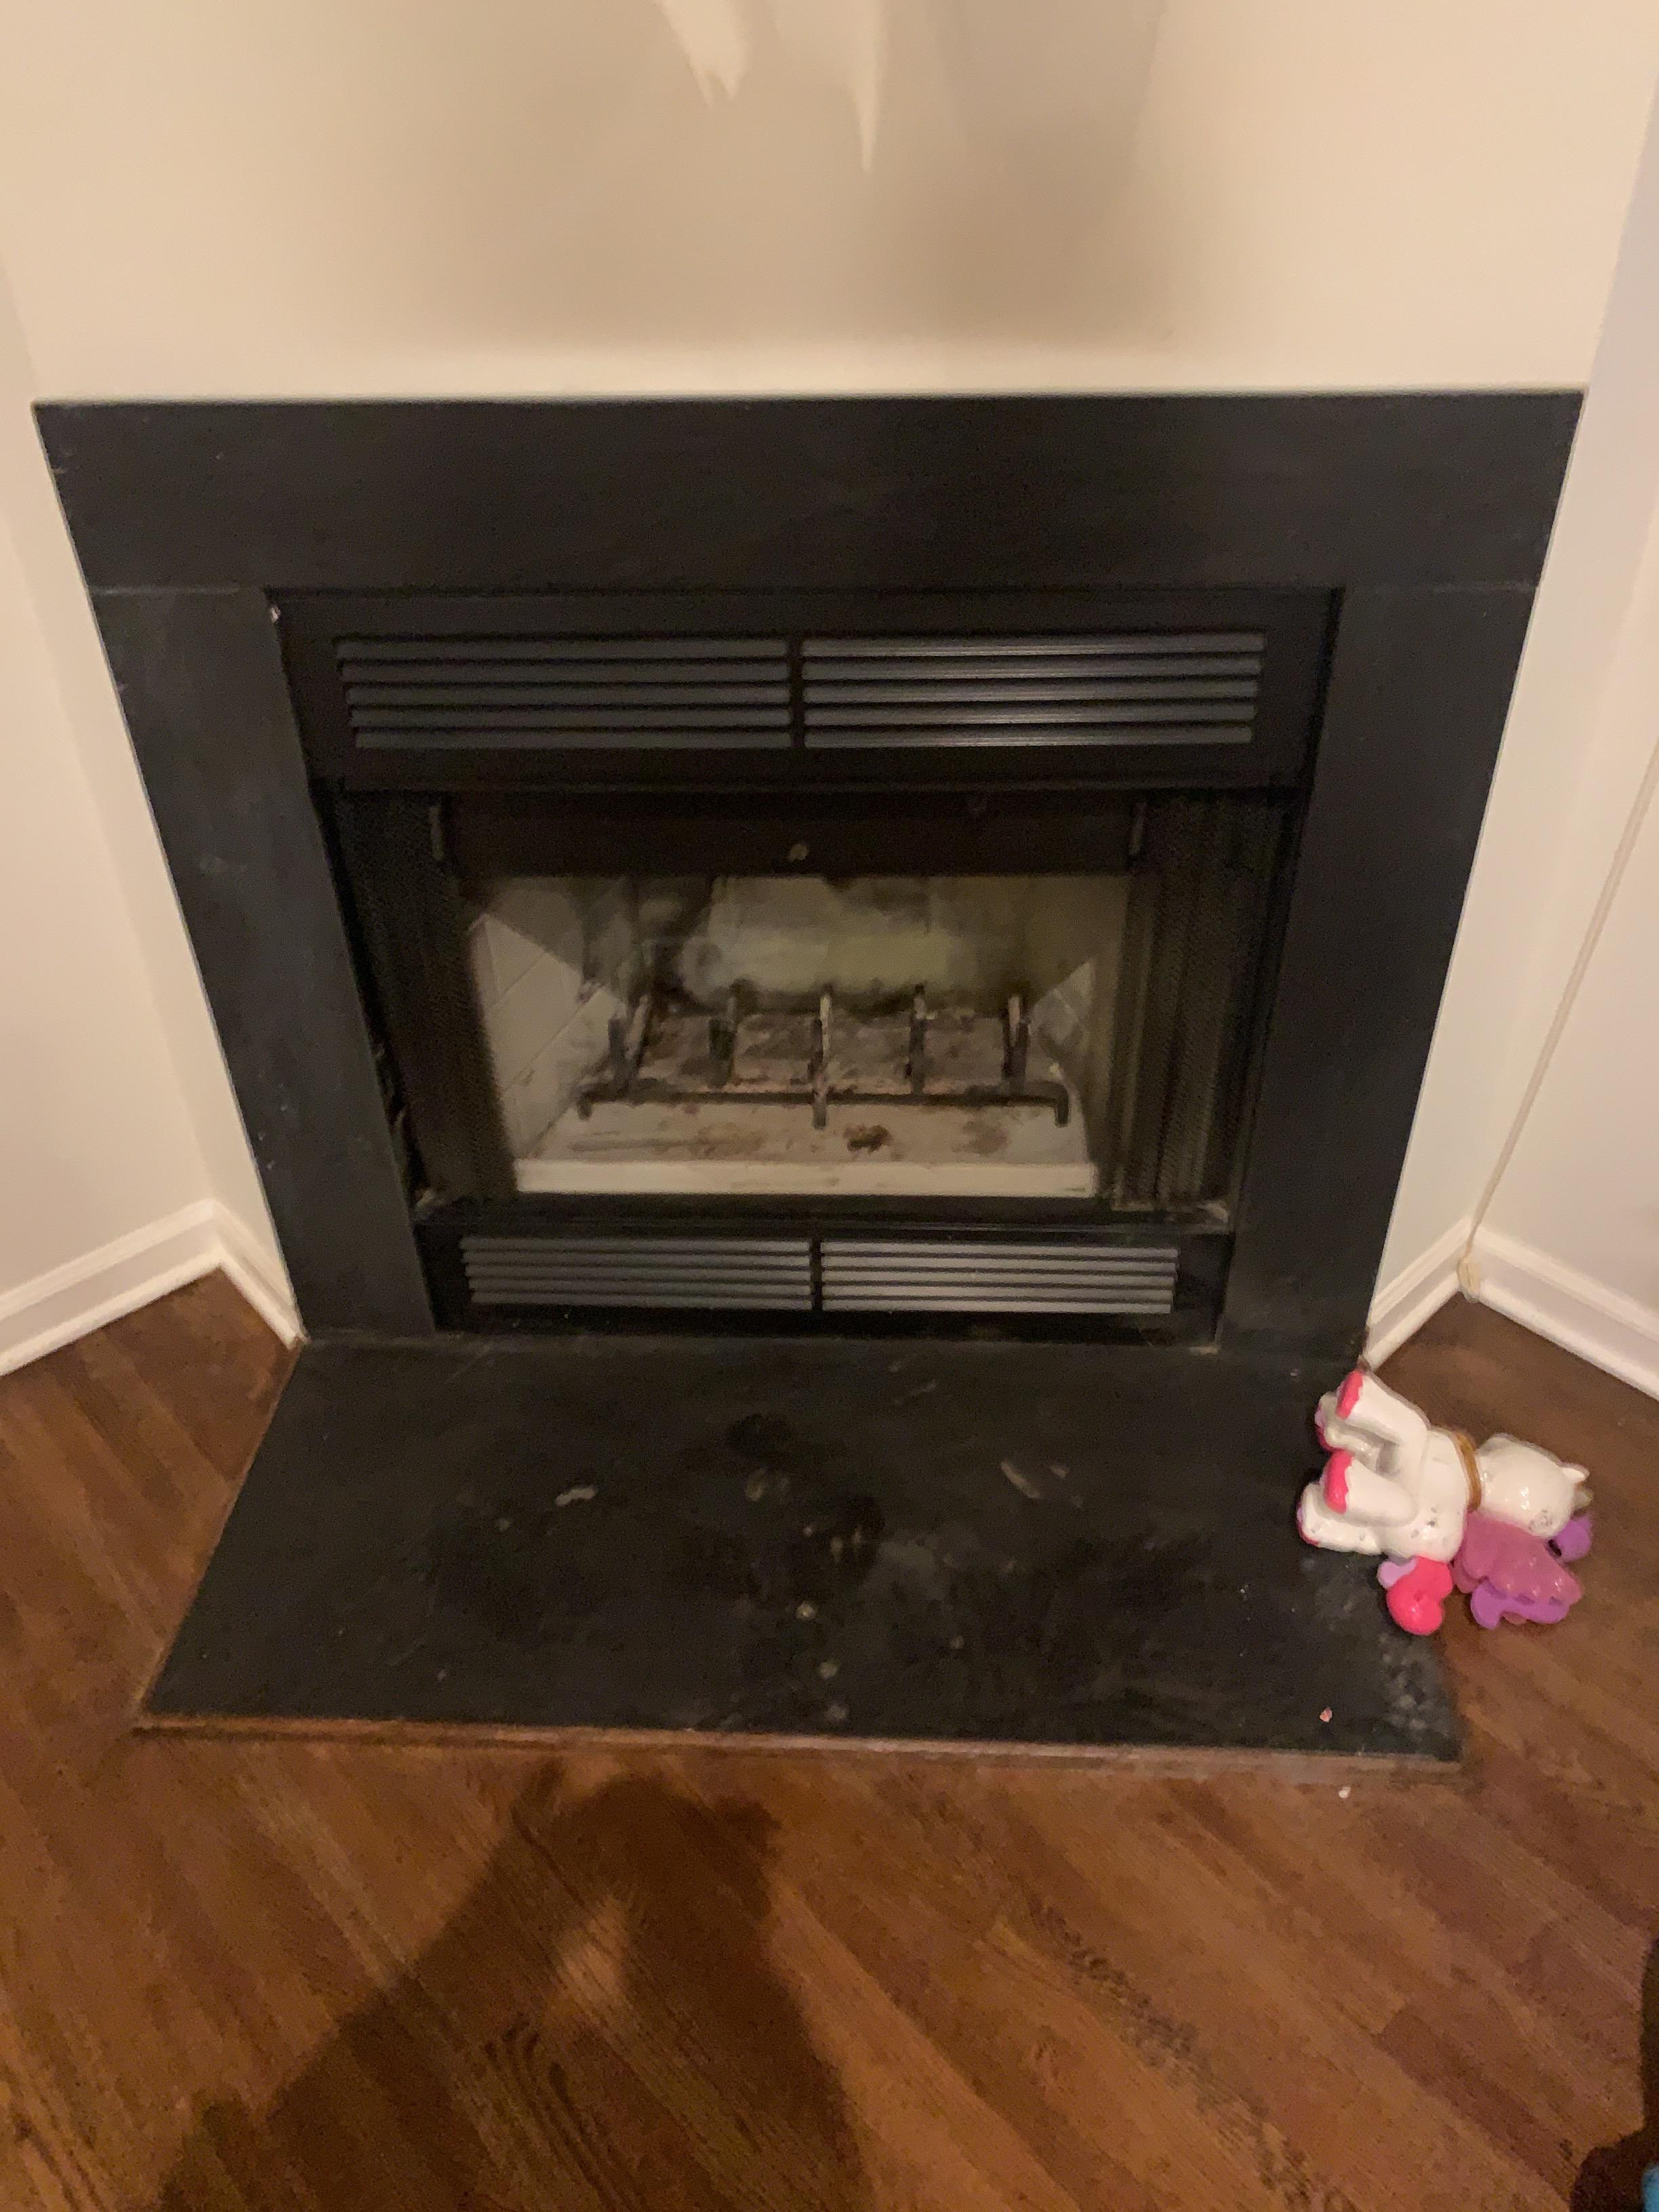 Soot from fireplace backing up